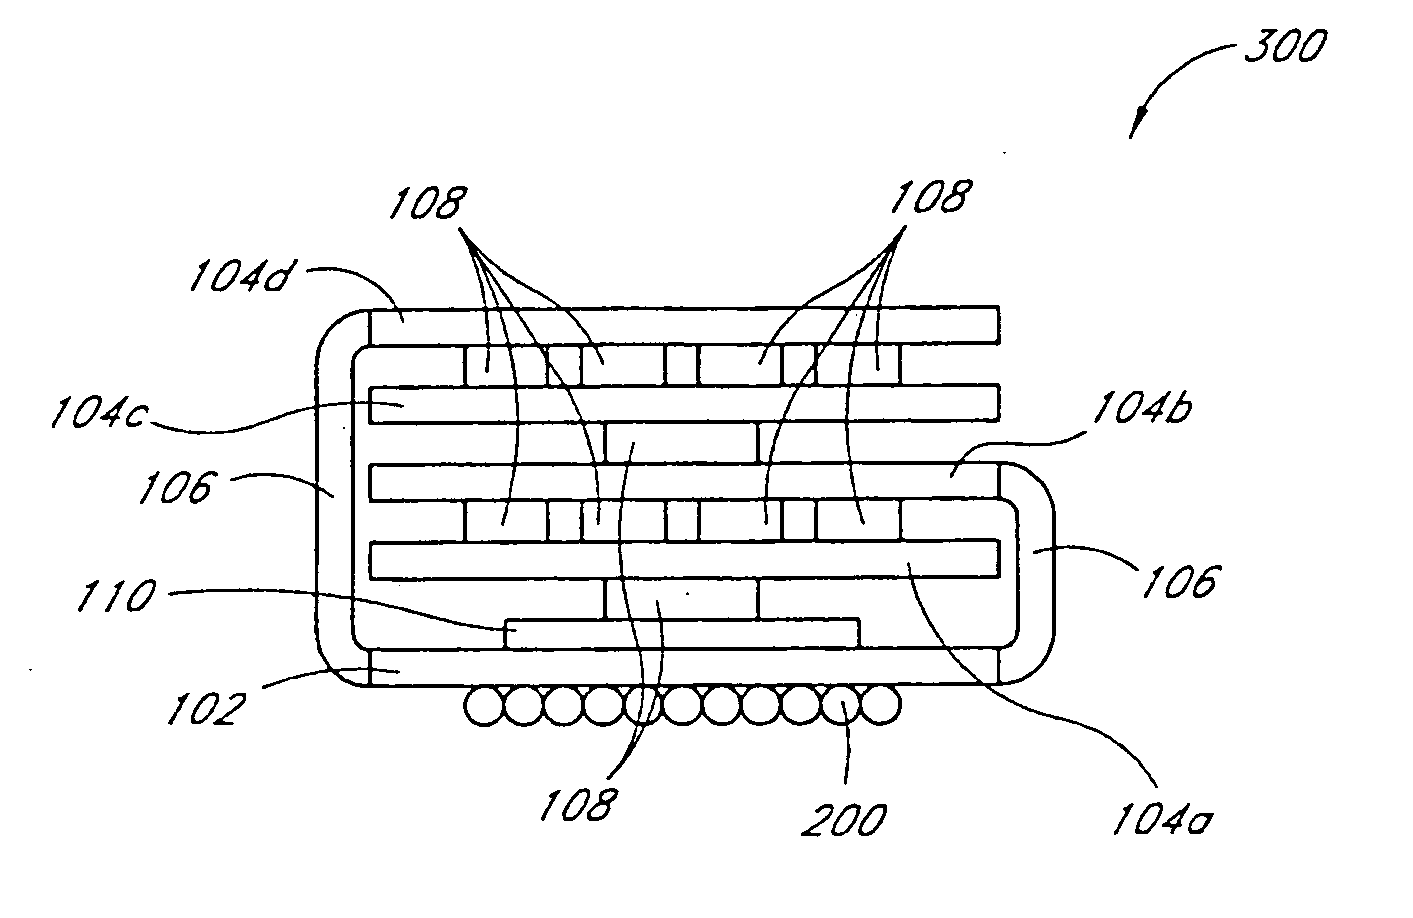 Processor/memory module with foldable substrate